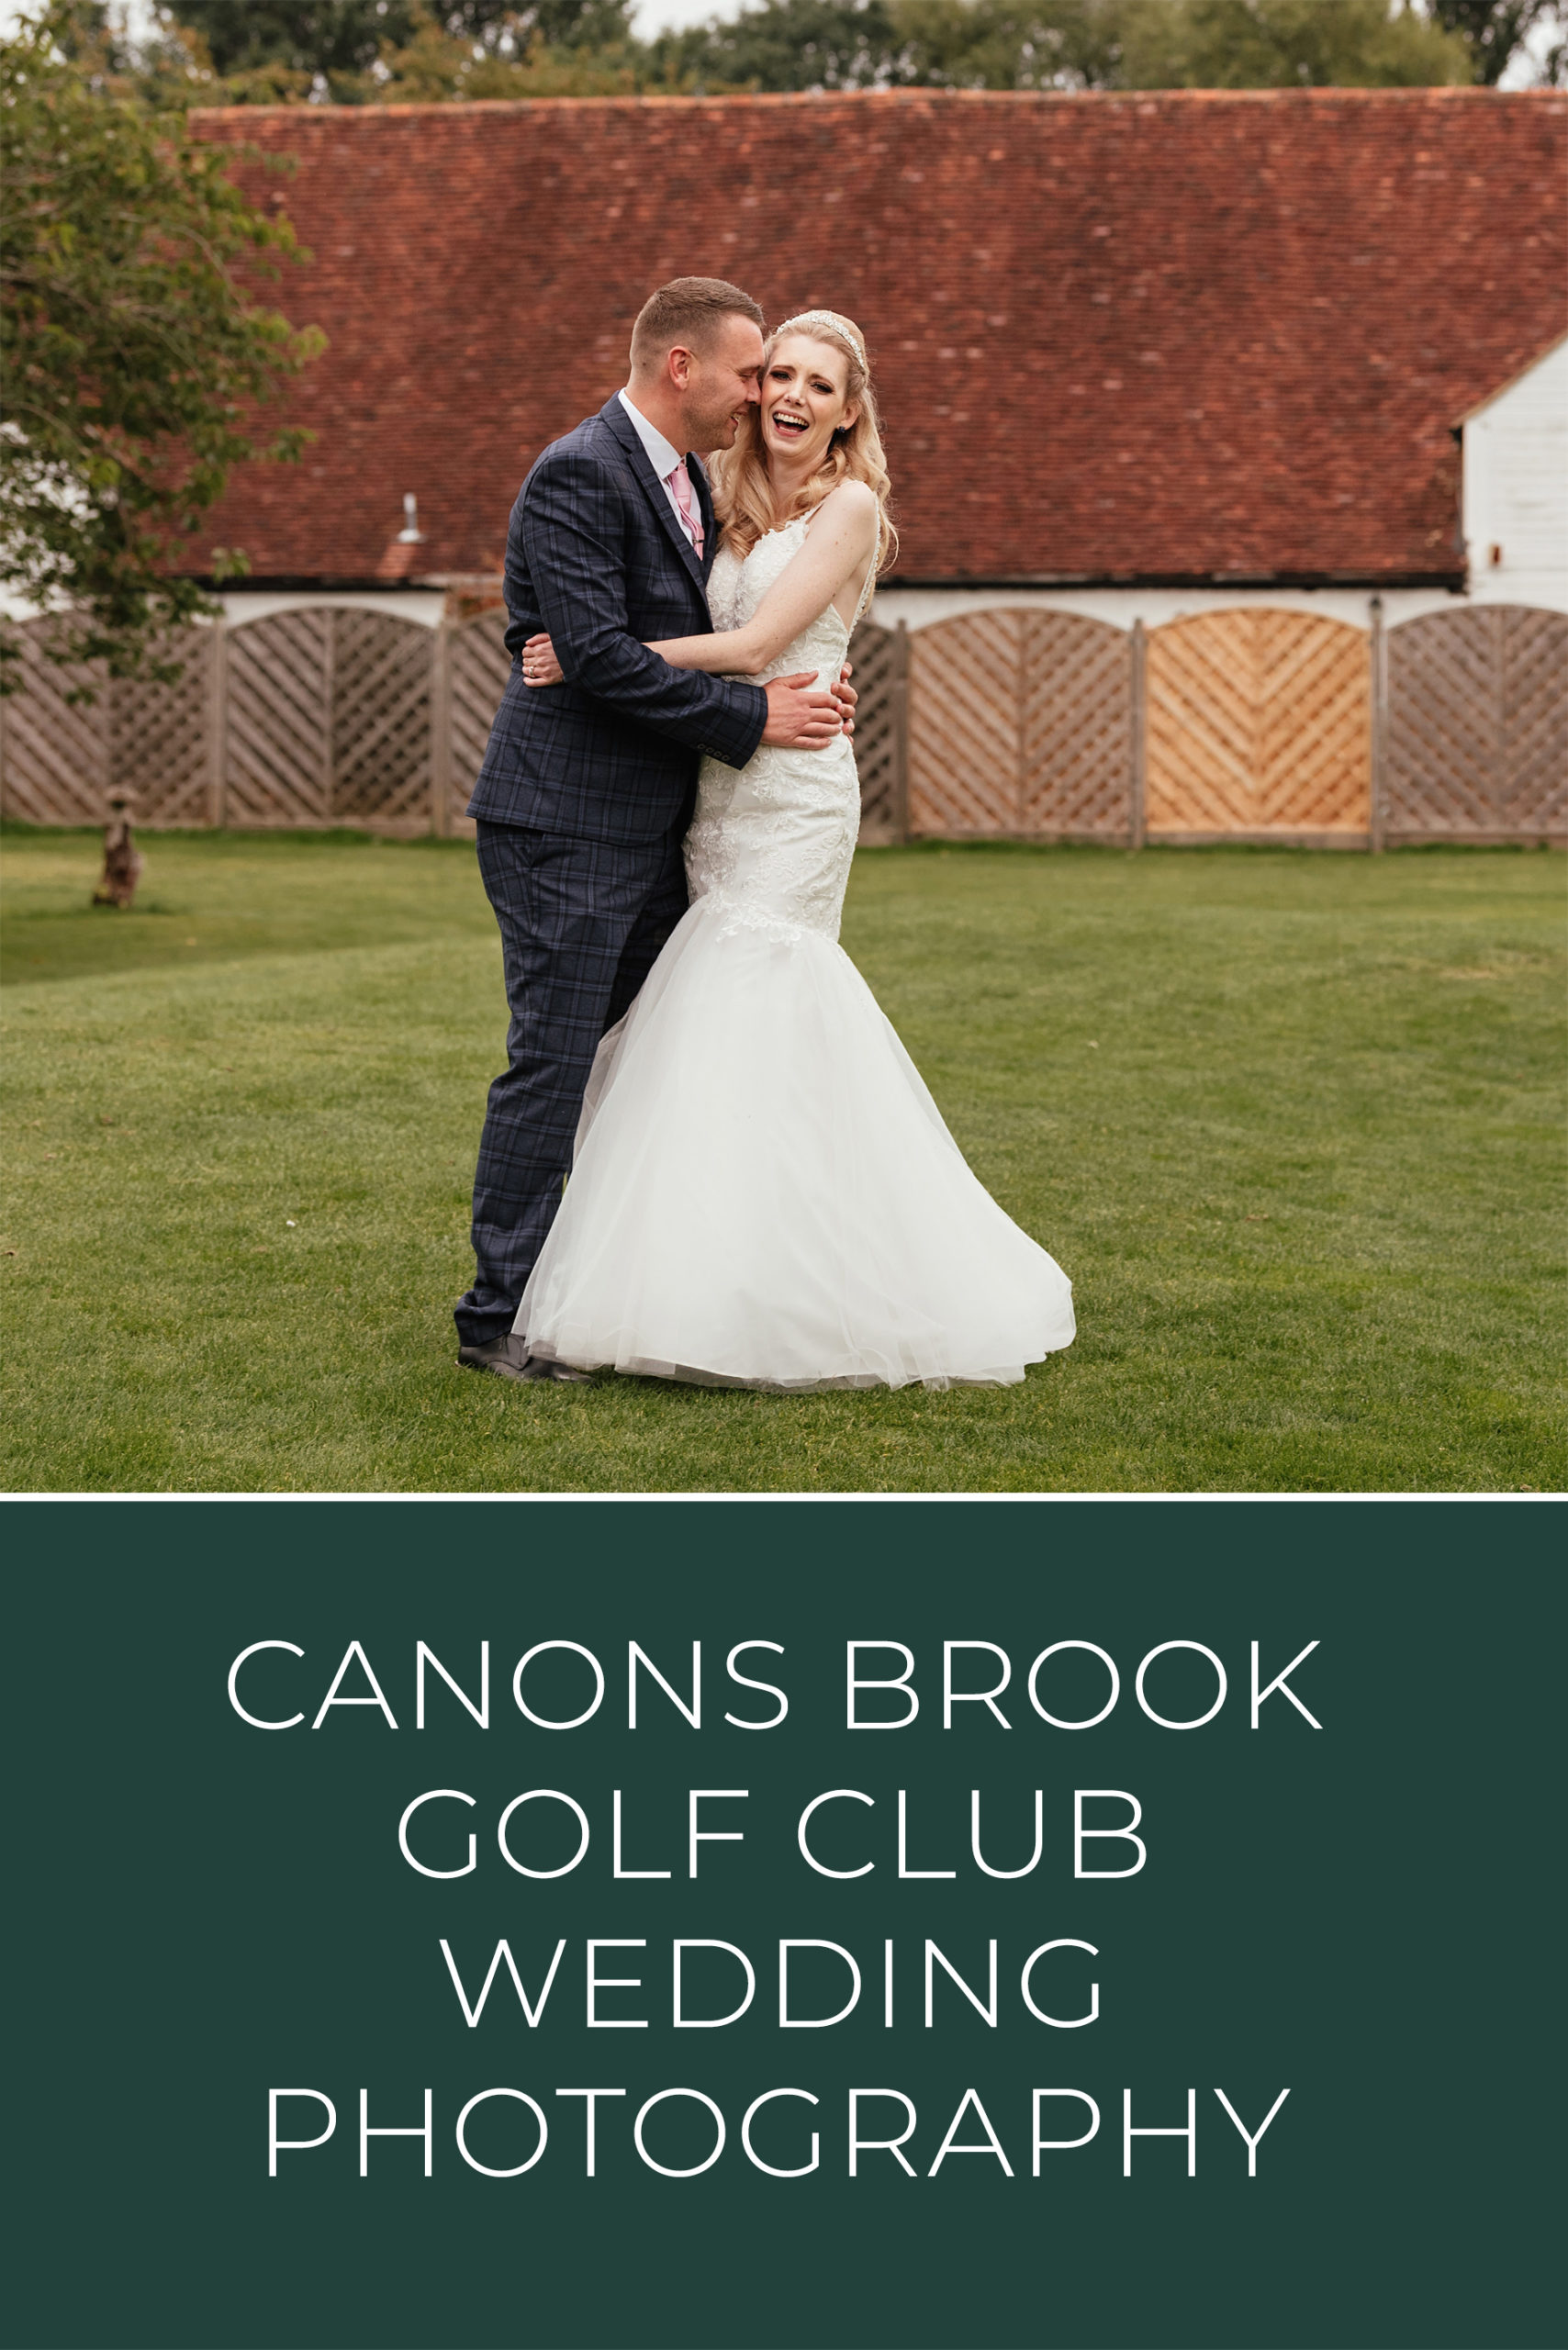 Canons Brook Golf Club Wedding Photography Pinterest Graphic